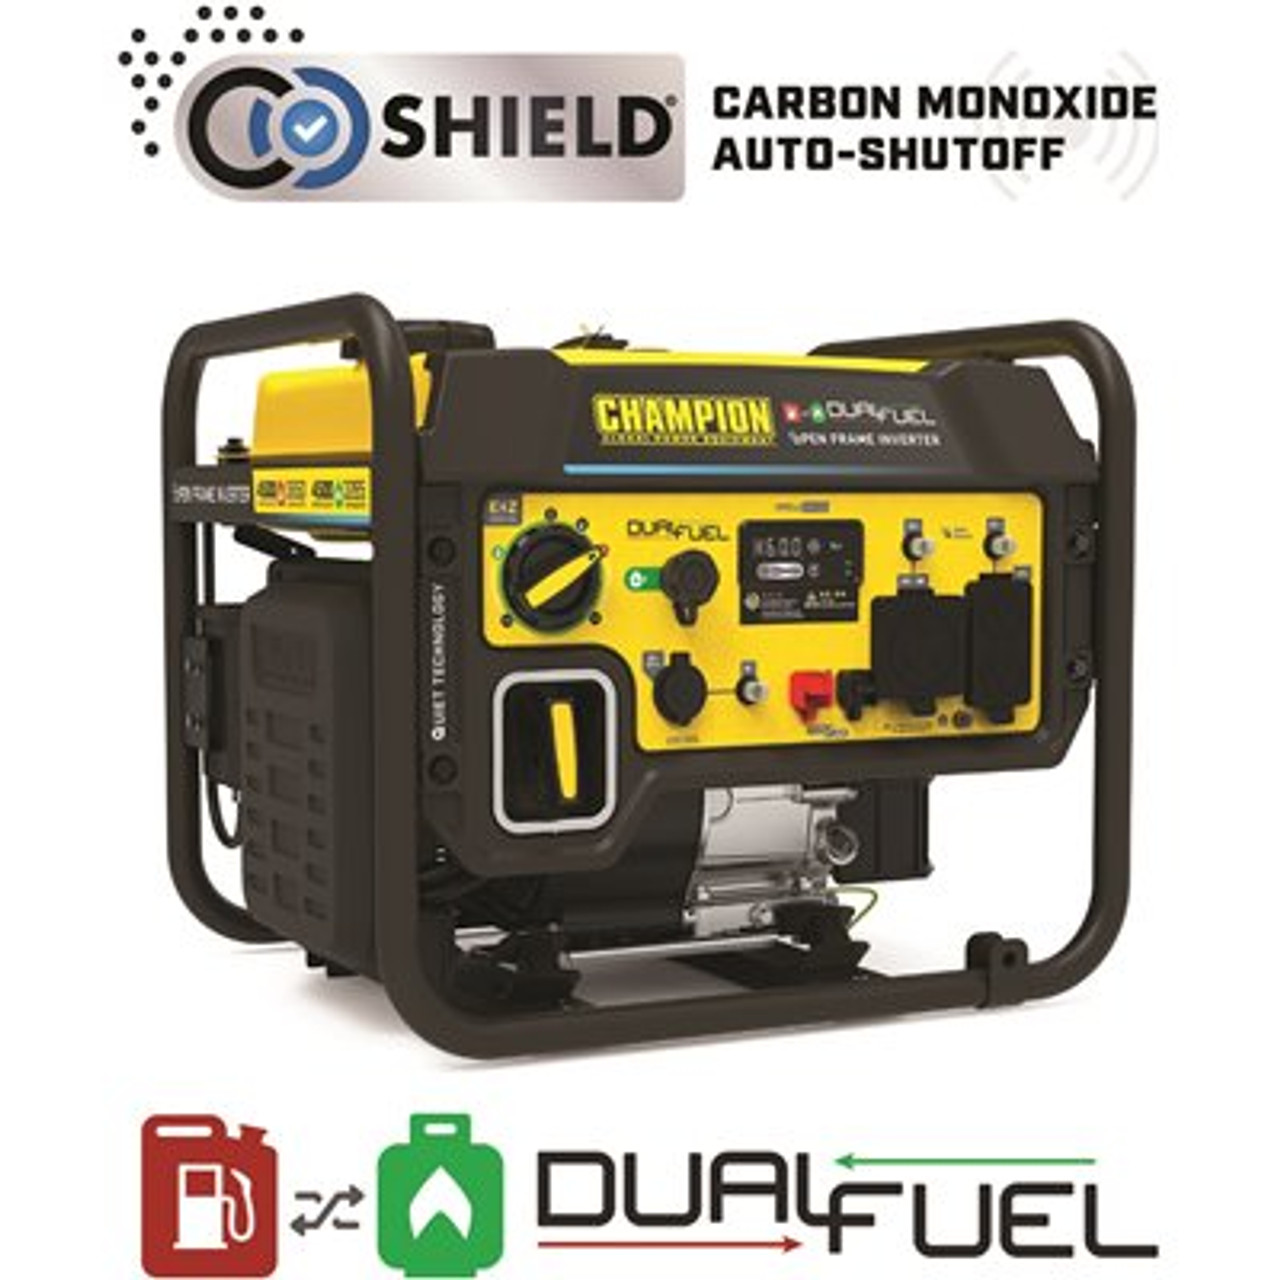 4500-Watt Recoil Start Gasoline and Propane Powered Dual Fuel Open Frame Inverter Generator with CO Shield